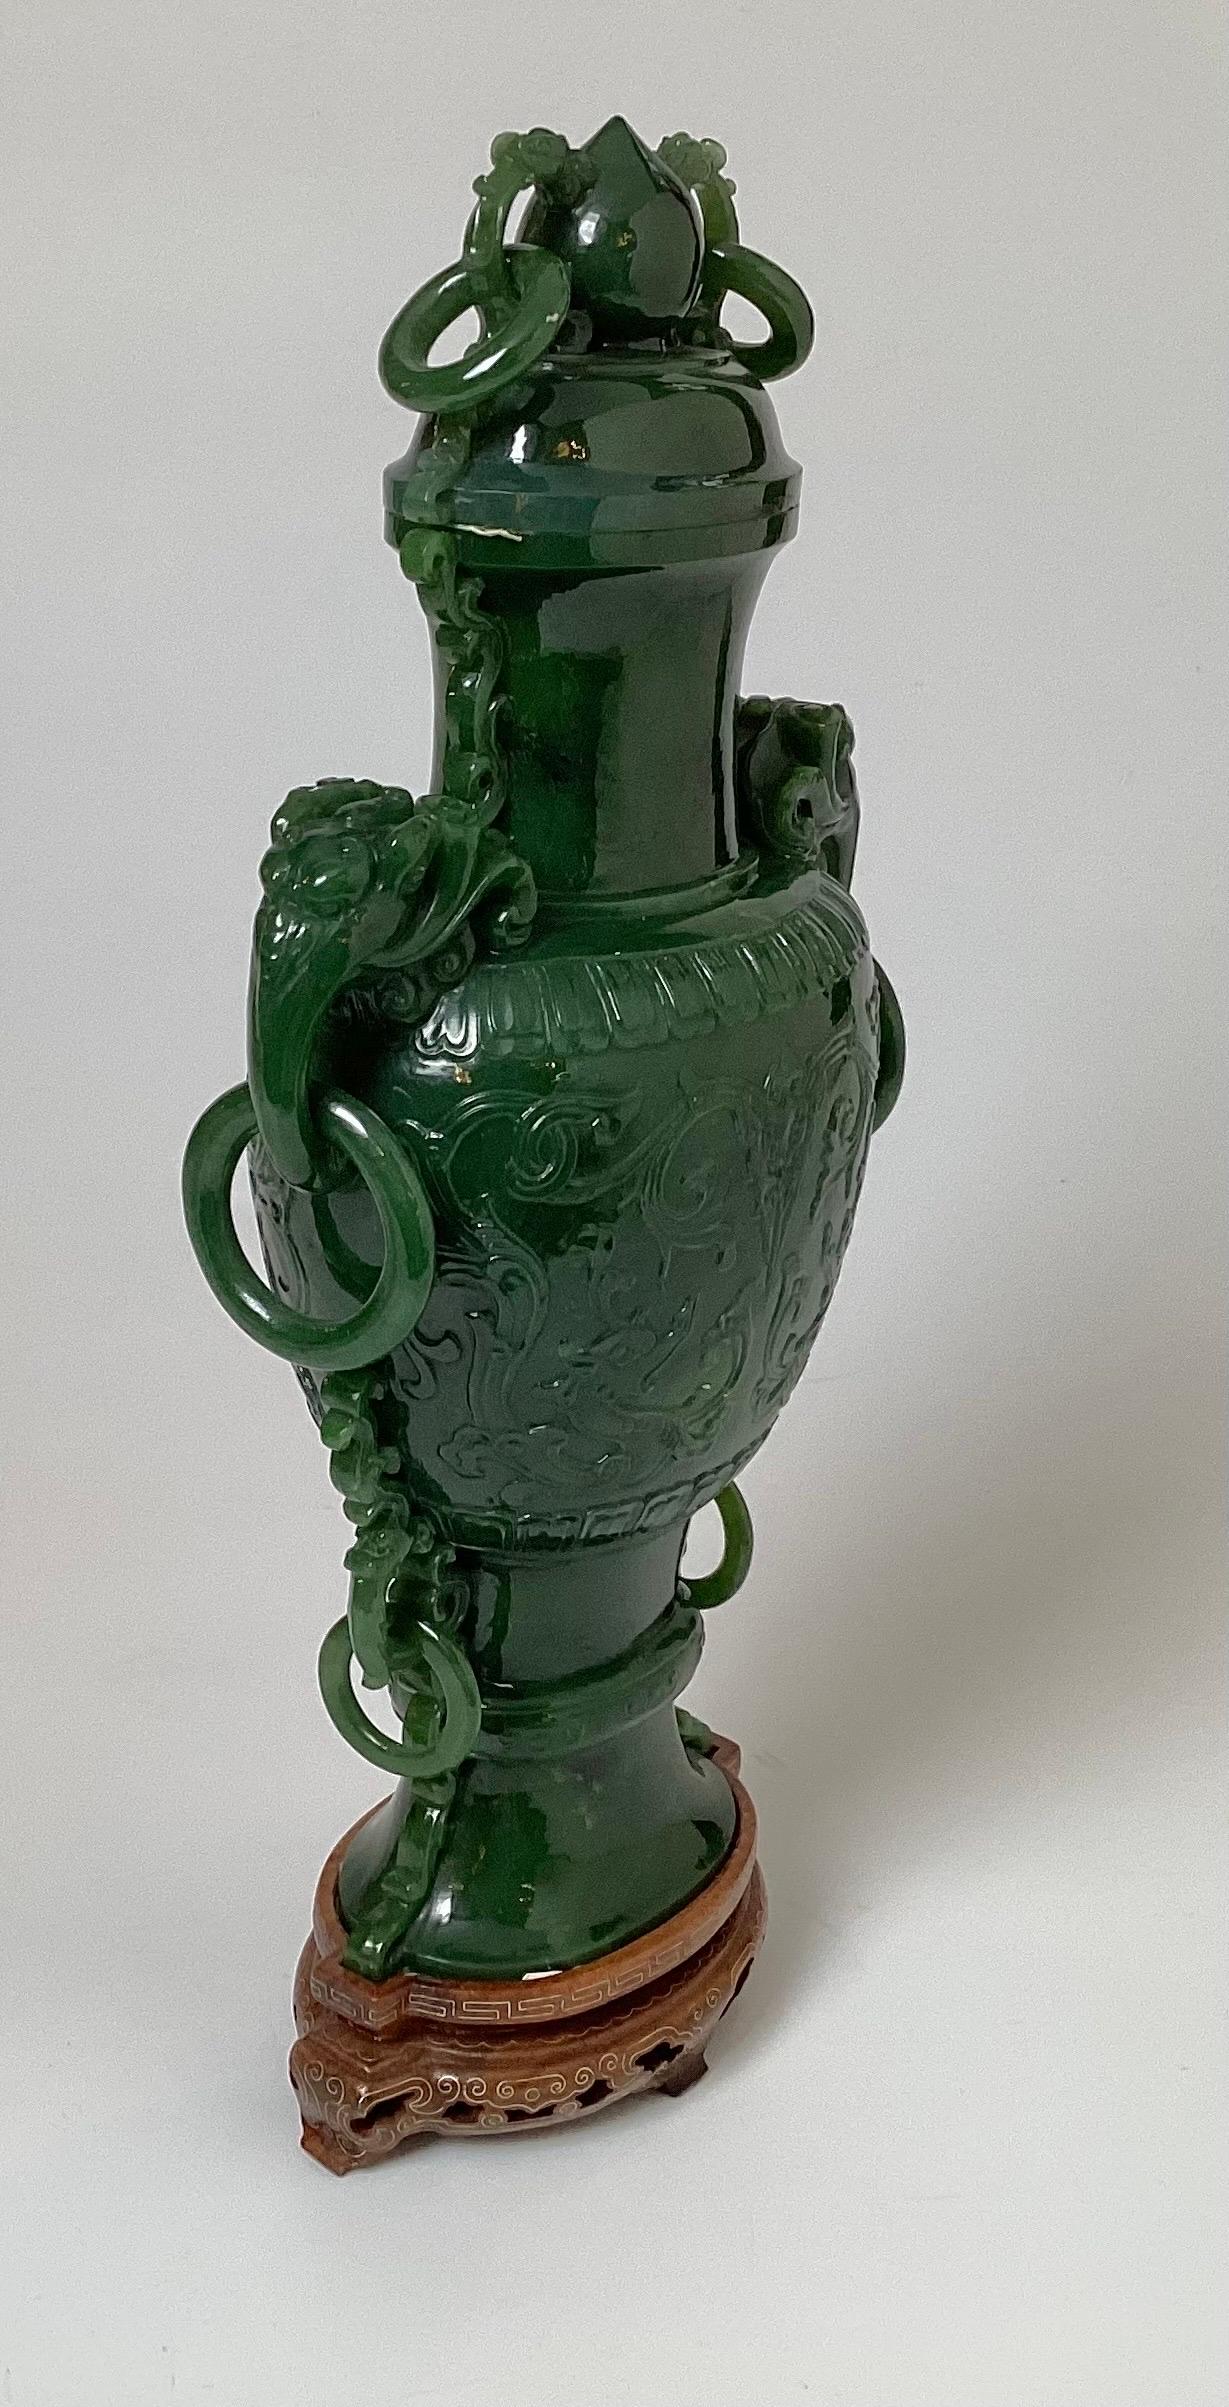 Intricately carved green jade carved vessel with lid. The deep green jade with elephant and ring handles with custom wood base. 12.75 inches tall including the base Early 20th Century, Qing/Republic period, China.